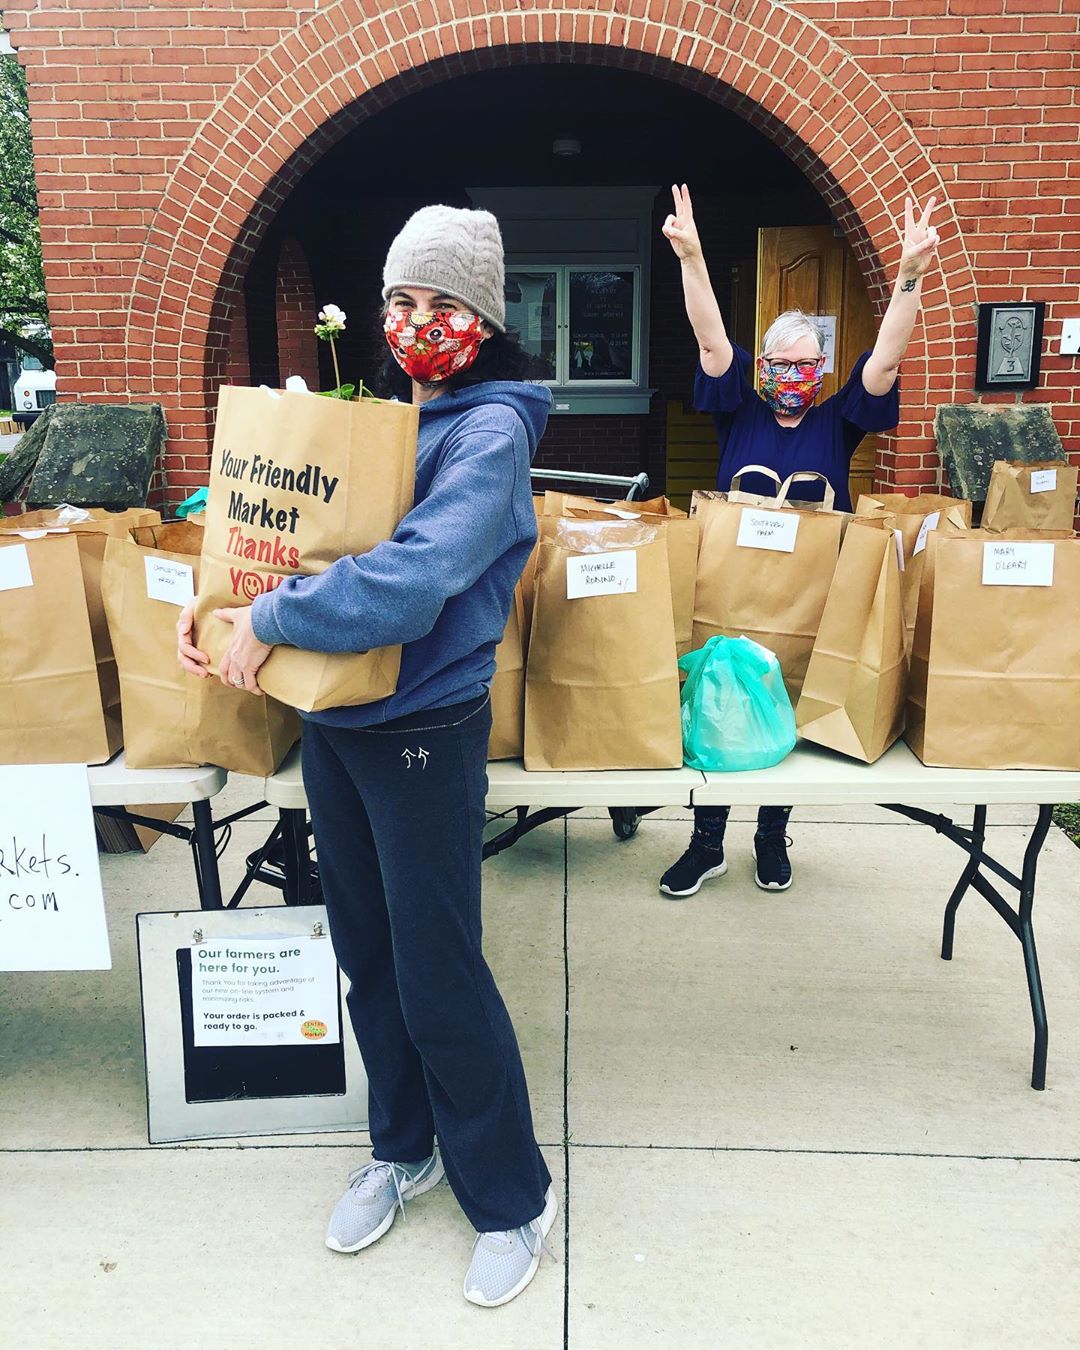 Thanks to our supporters and helpers!
So many absolutely gorgeous veggies,brews, baked goods, plants and more passed through our gloved hands today - but we didn’t get to take any pictures. When you get home and unpack your bountiful bag - please share 